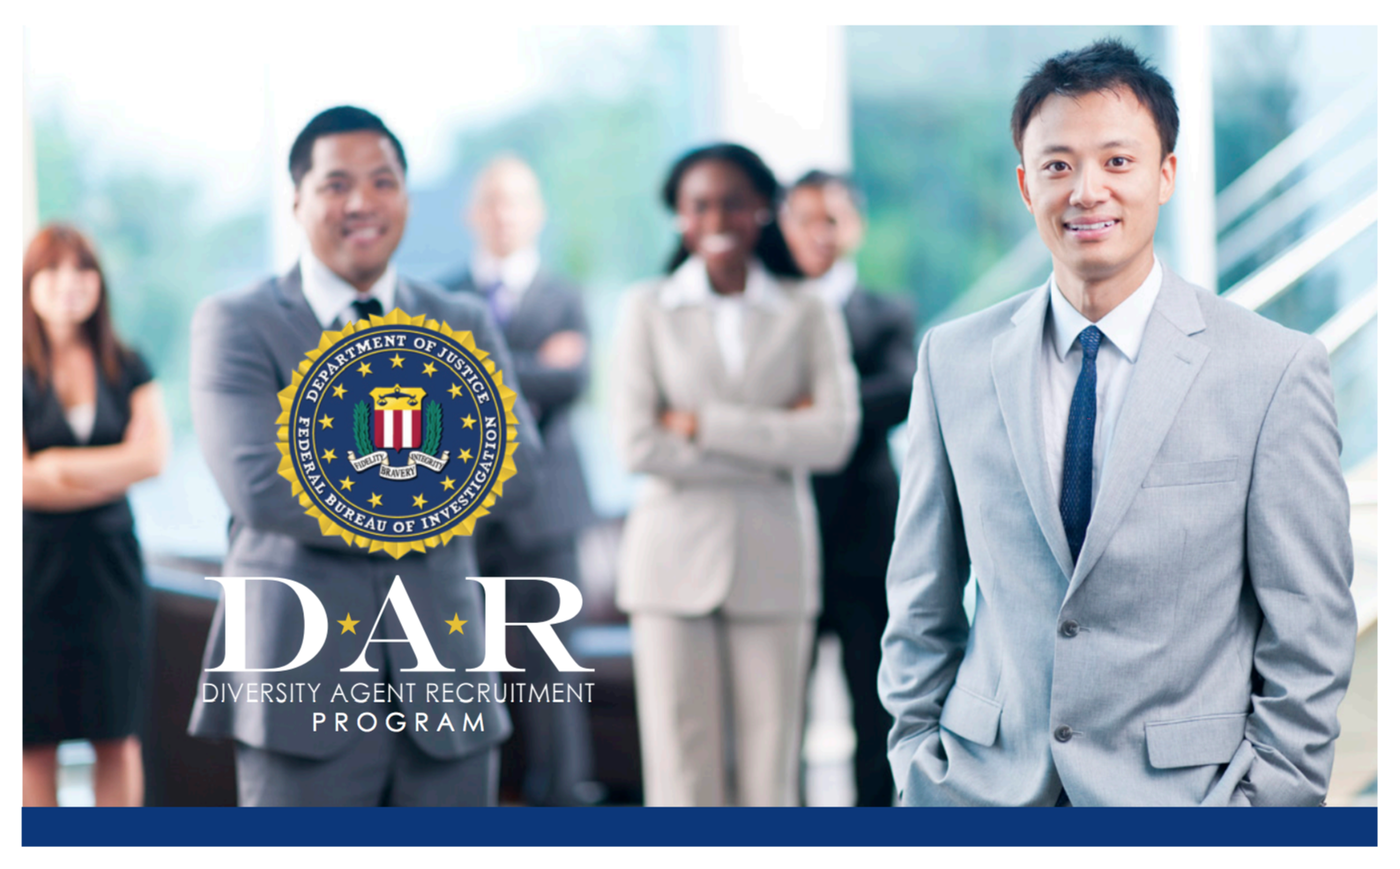 Through the Diversity Agent Recruitment (DAR) program, we want to collaborate with your organization to attract diverse, qualified applicants to the special agent role.